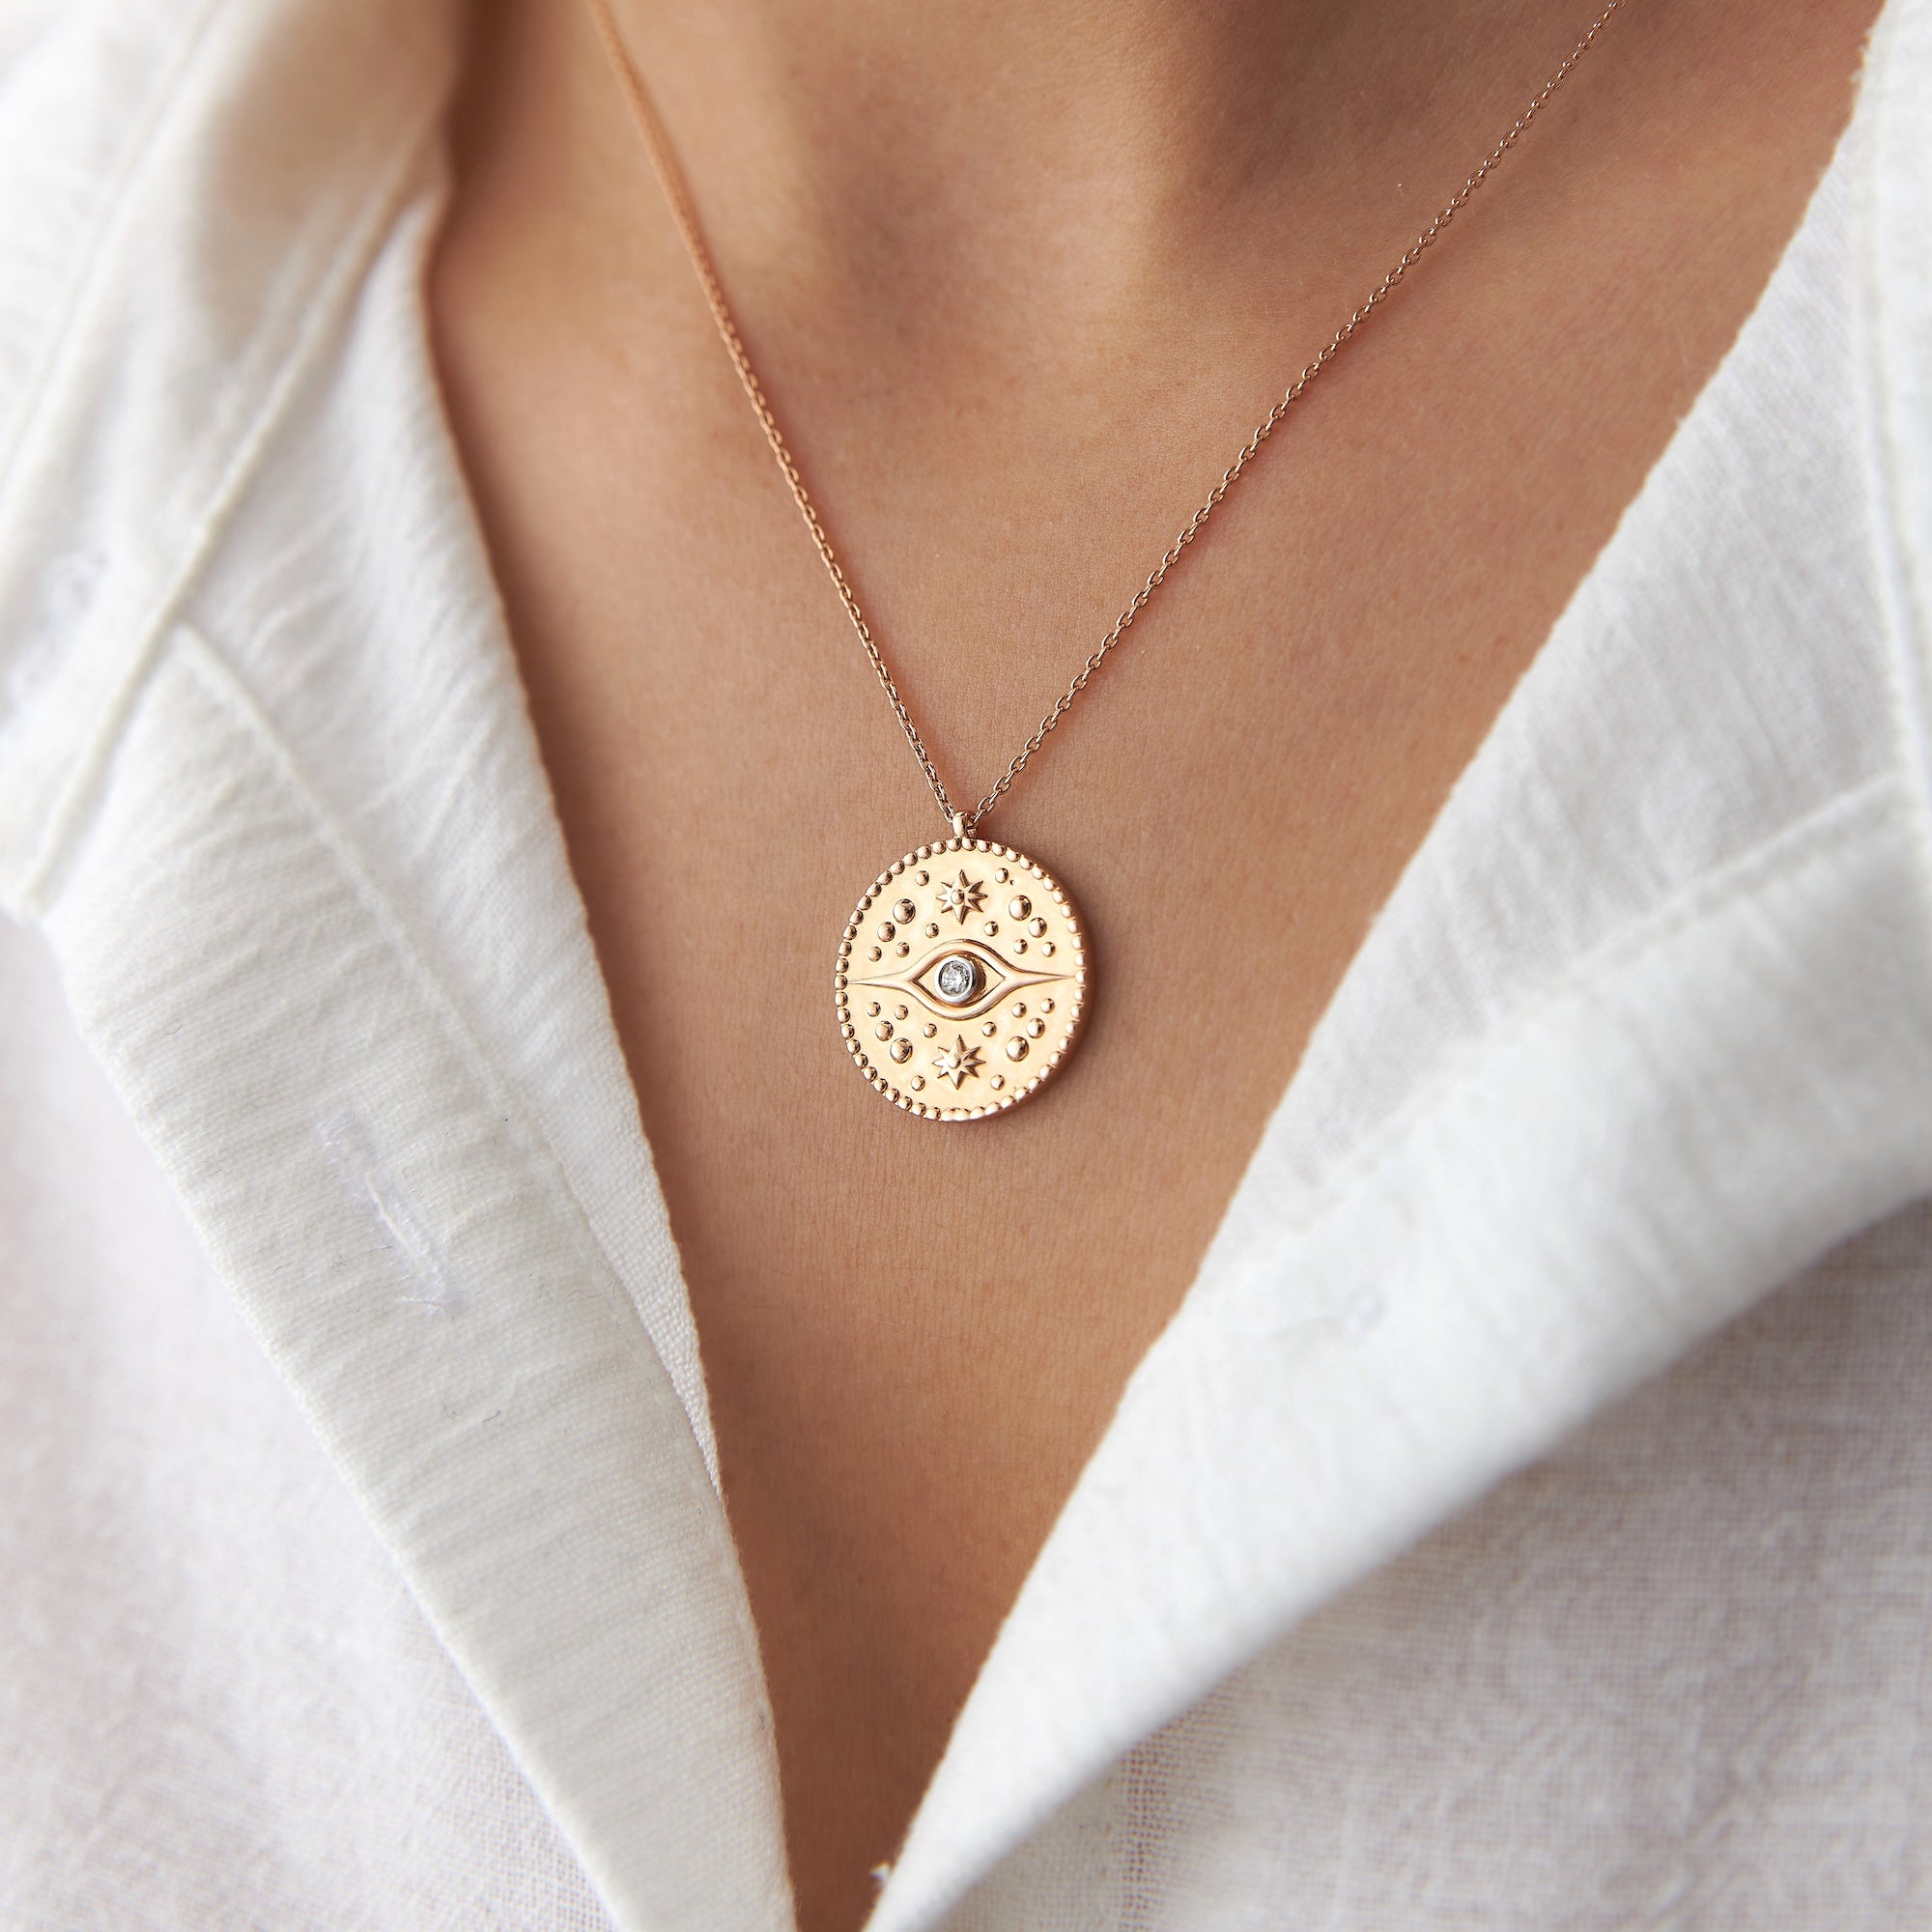 Diamond Medallion Coin Necklace Available in 14K and 18K Gold